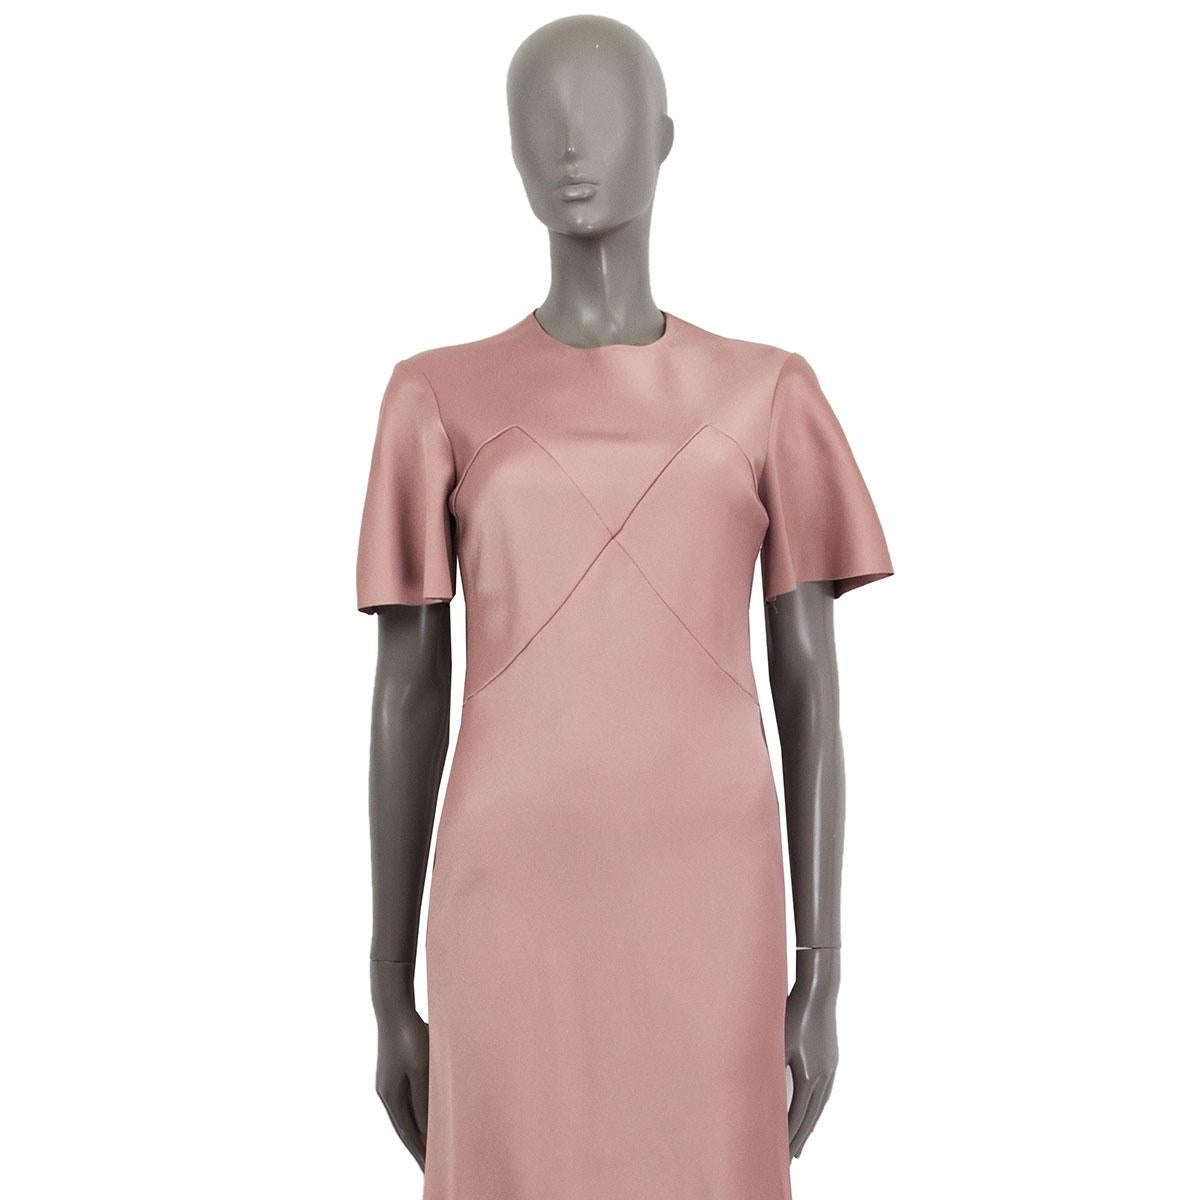 100% authentic Jil Sander Short Sleeve Body-Con Dress in blush acetate (70%) and viscose (30%) with a round neck. Closes on the back with a concealed zipper. Unlined. Has been worn and is in excellent condition.   

Tag Size 34
Size XS
Shoulder